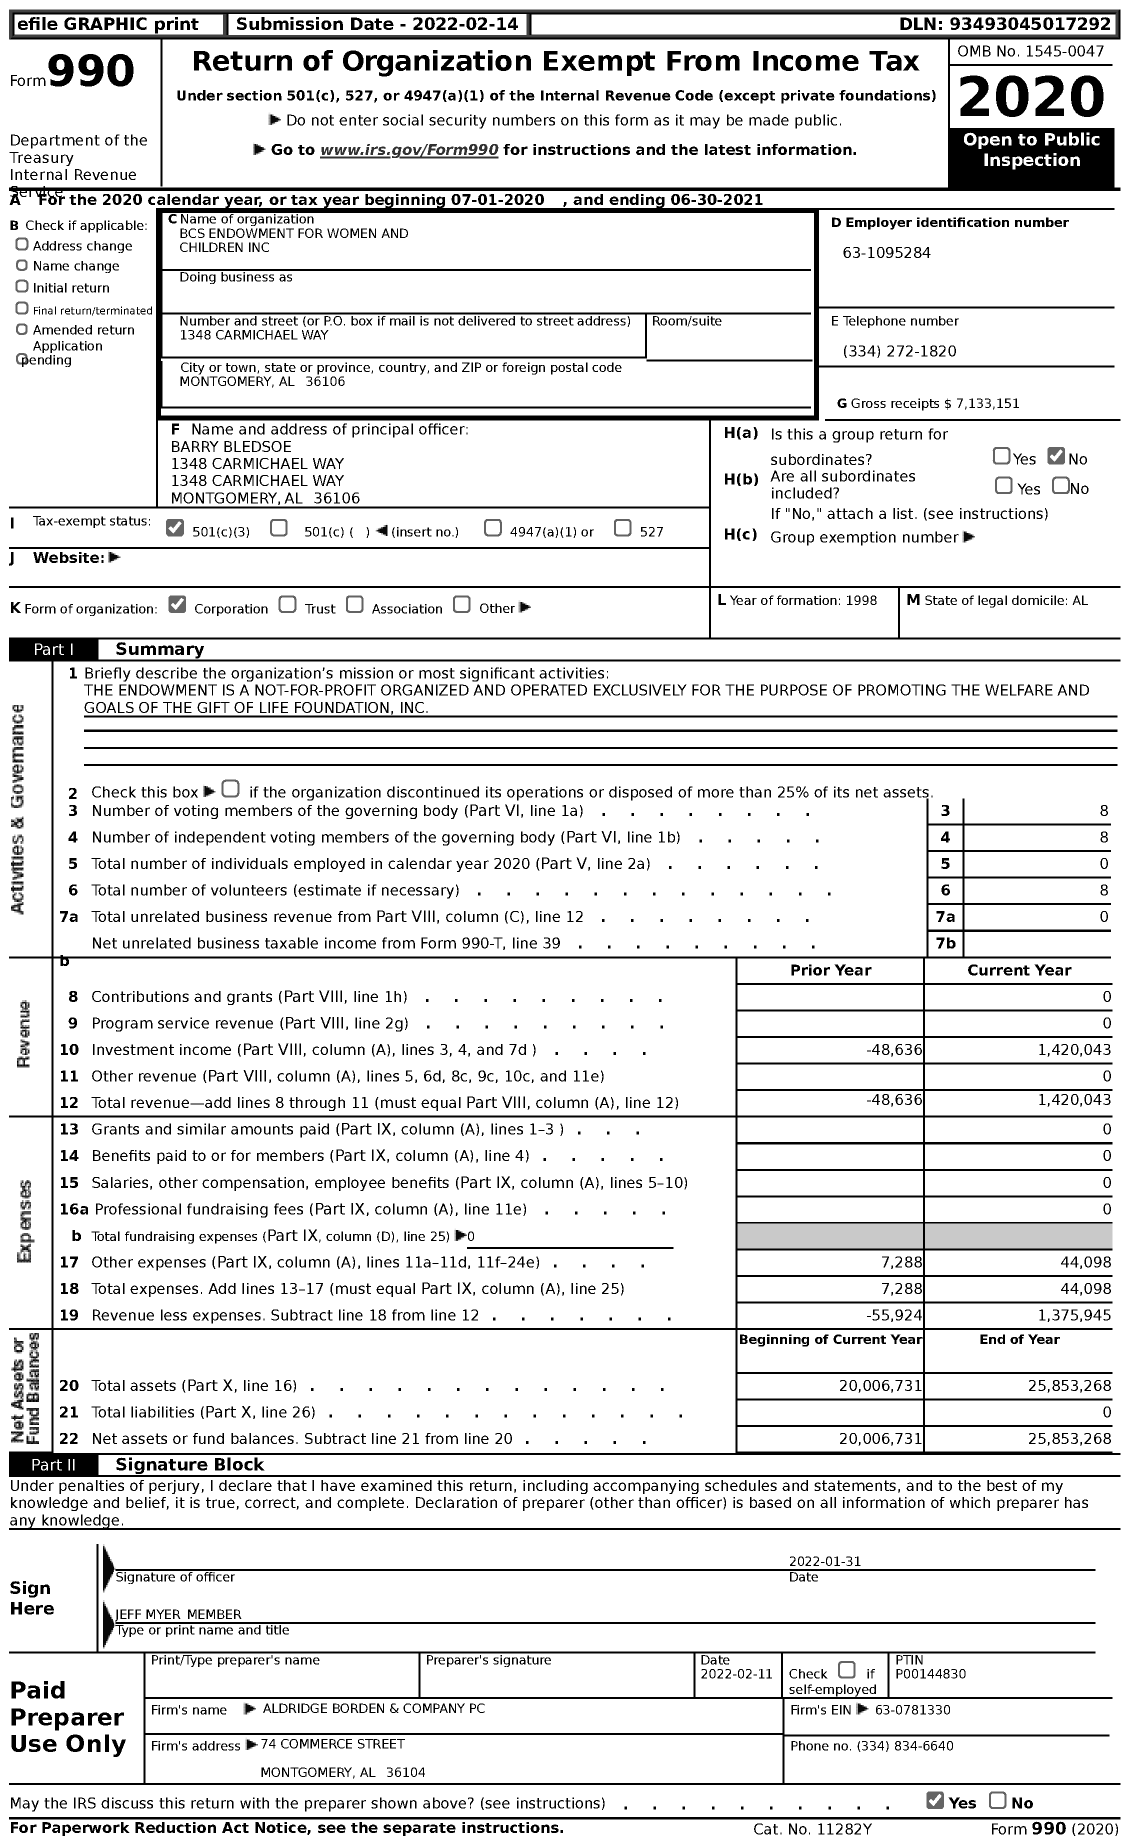 Image of first page of 2020 Form 990 for BCS Endowment for Women and Children